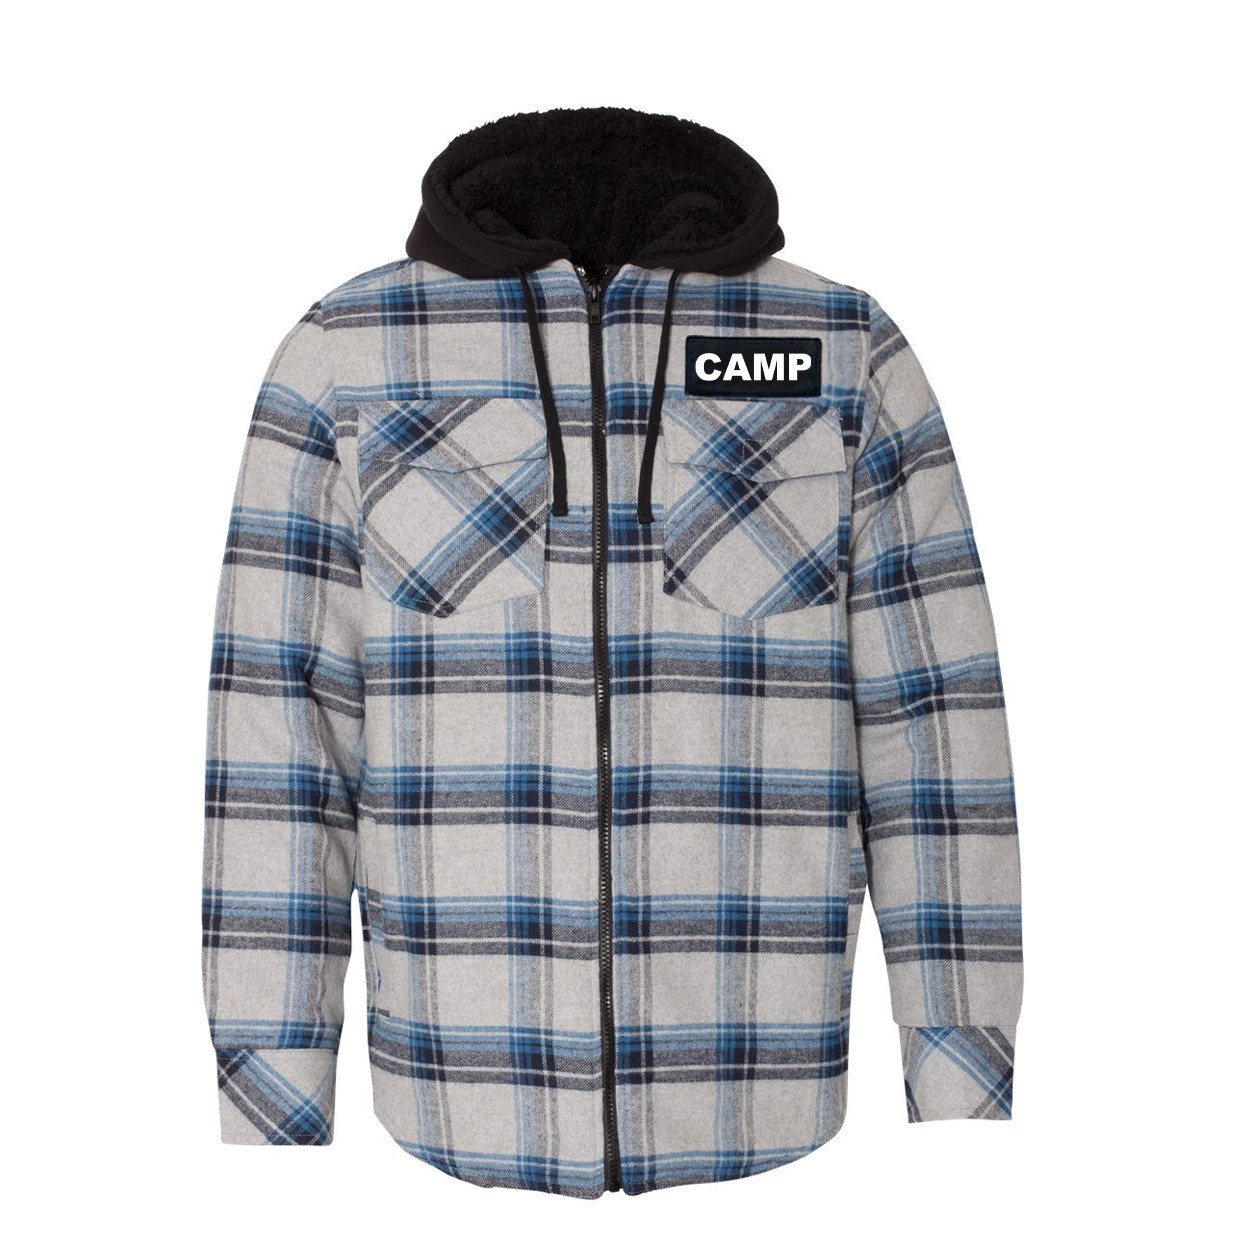 Camp Brand Logo Classic Unisex Full Zip Woven Patch Hooded Flannel Jacket Gray/ Blue (White Logo)